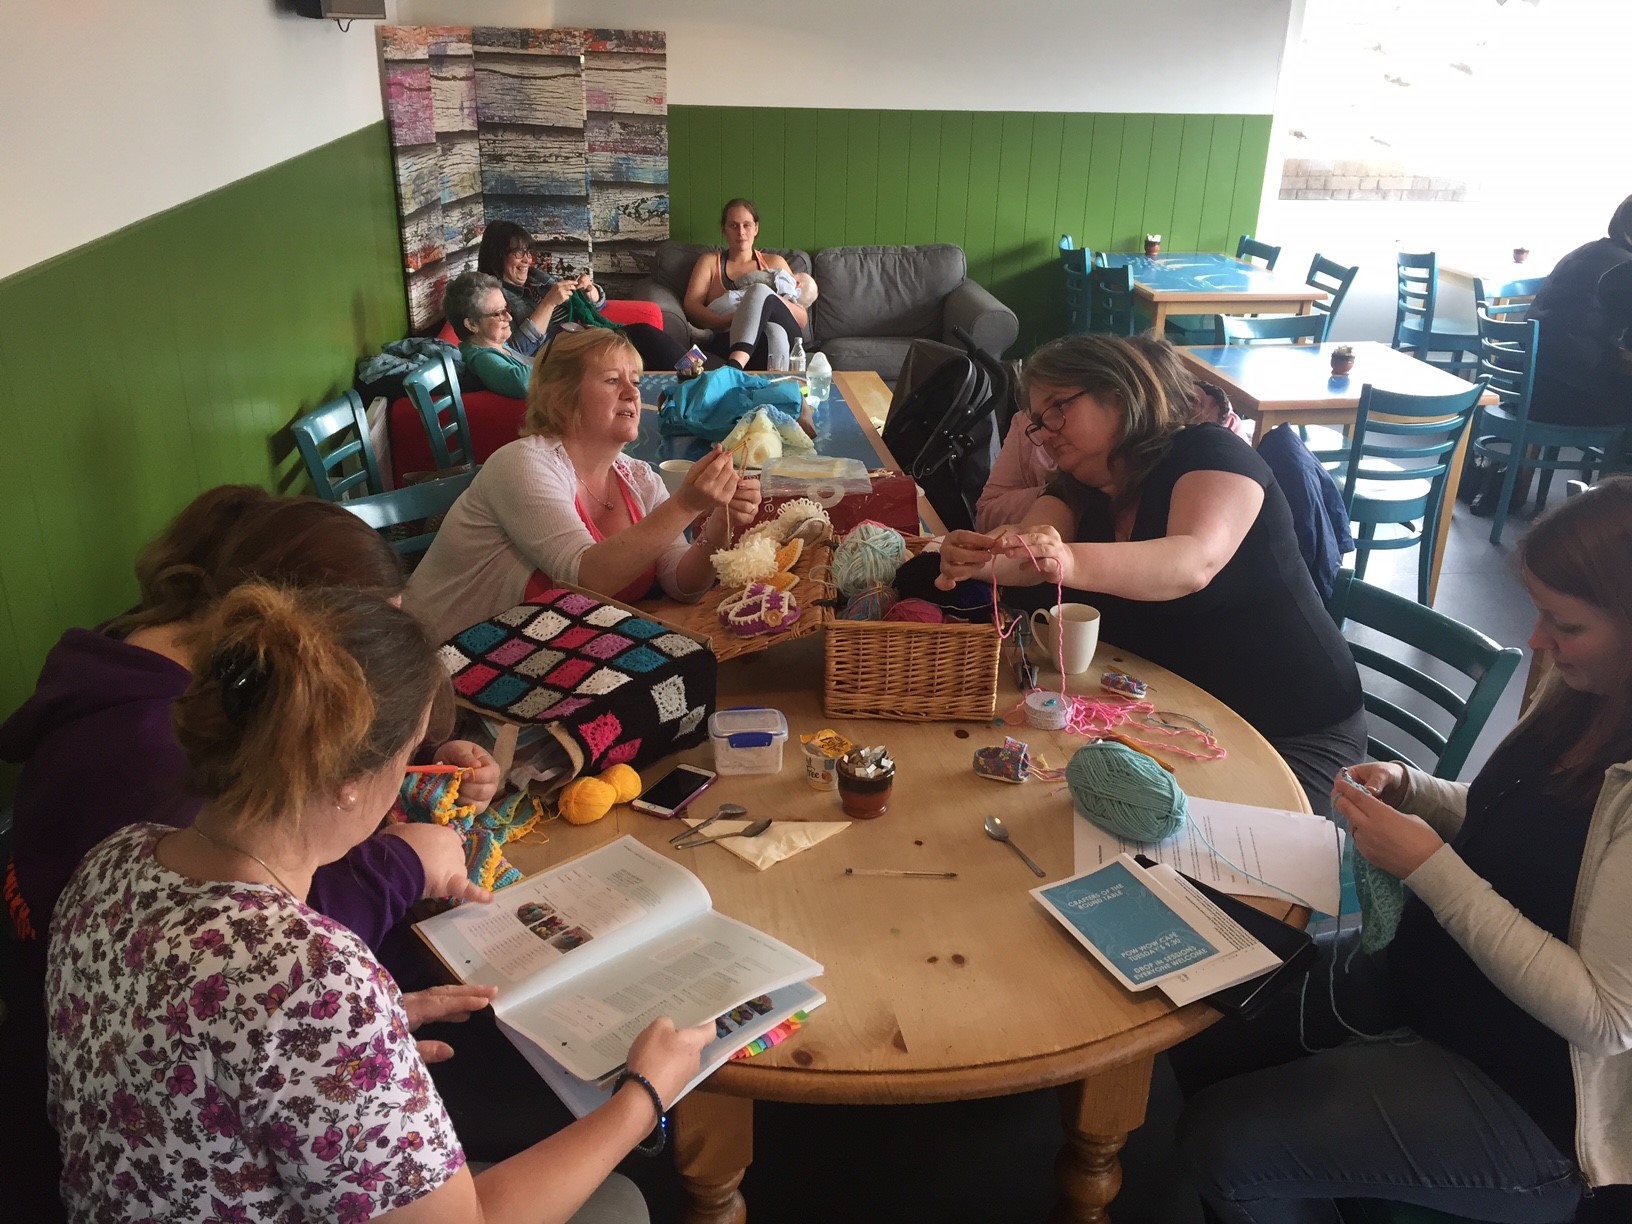 Teignmouth’s Pow Wow cafe & the Crafters of Round Table